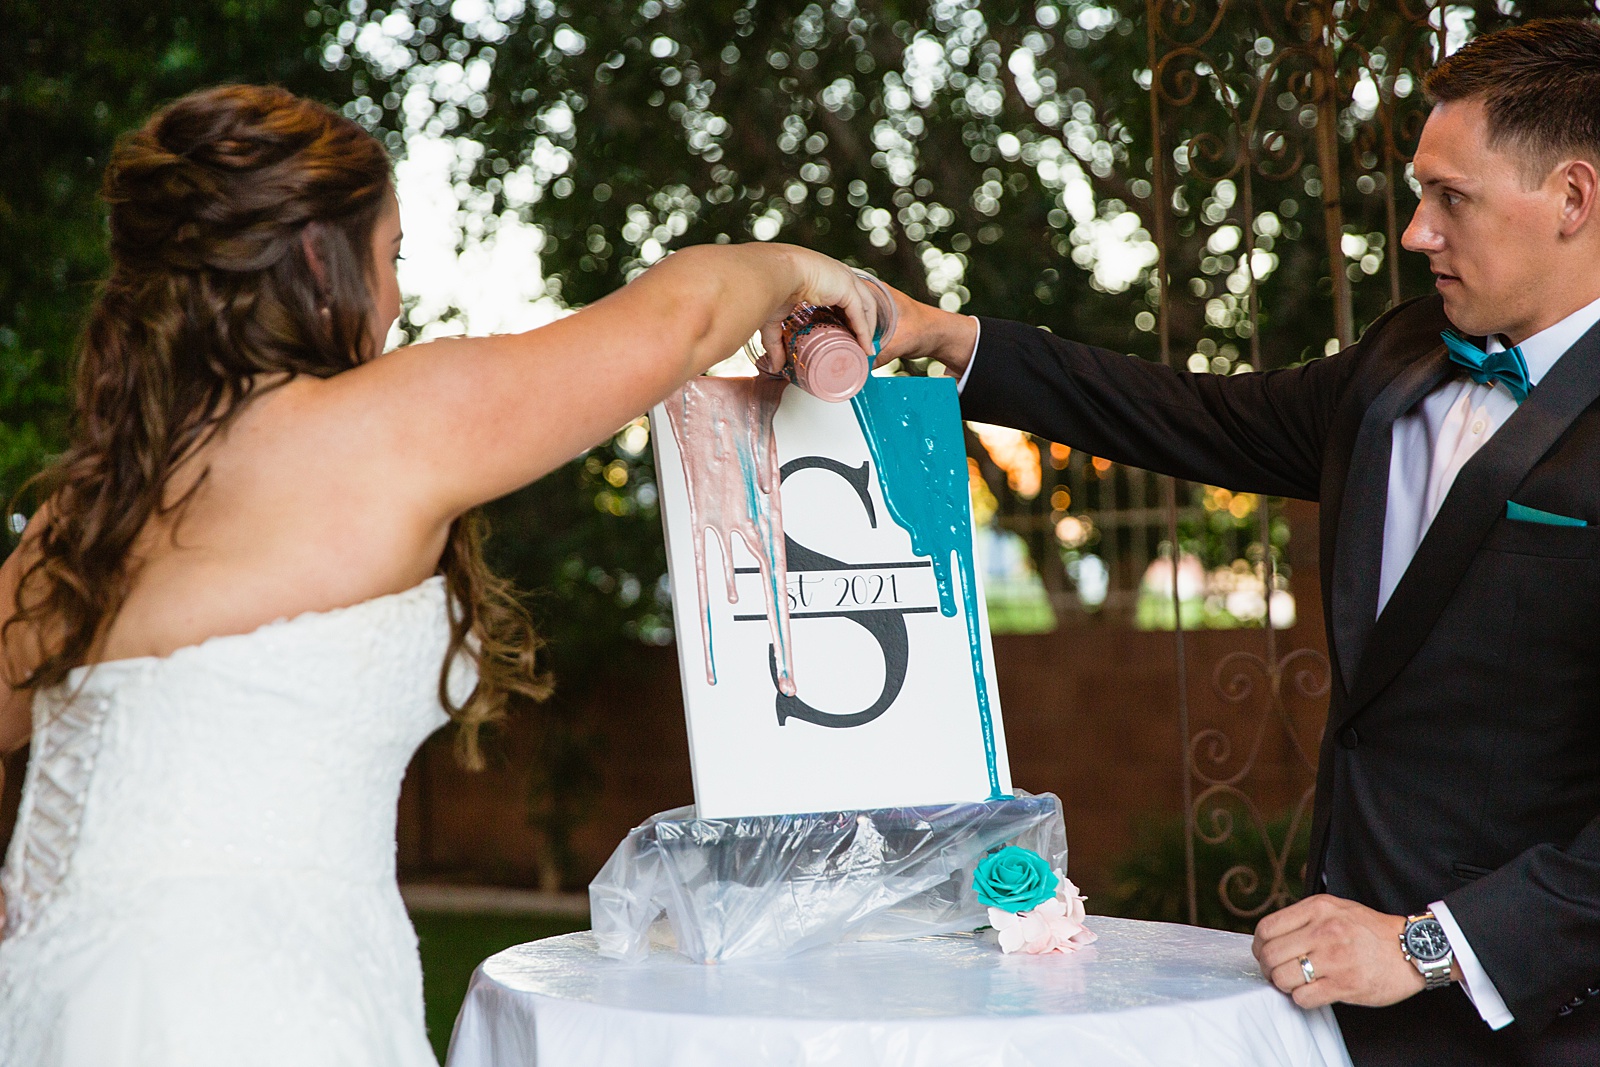 Unique unity ceremony of a paint pouring during a wedding ceremony. The couple pours different color paints onto the canvas and removed the sticker to create a custom piece of art for their home. Photograph by Arizona wedding photographer PMA Photography.